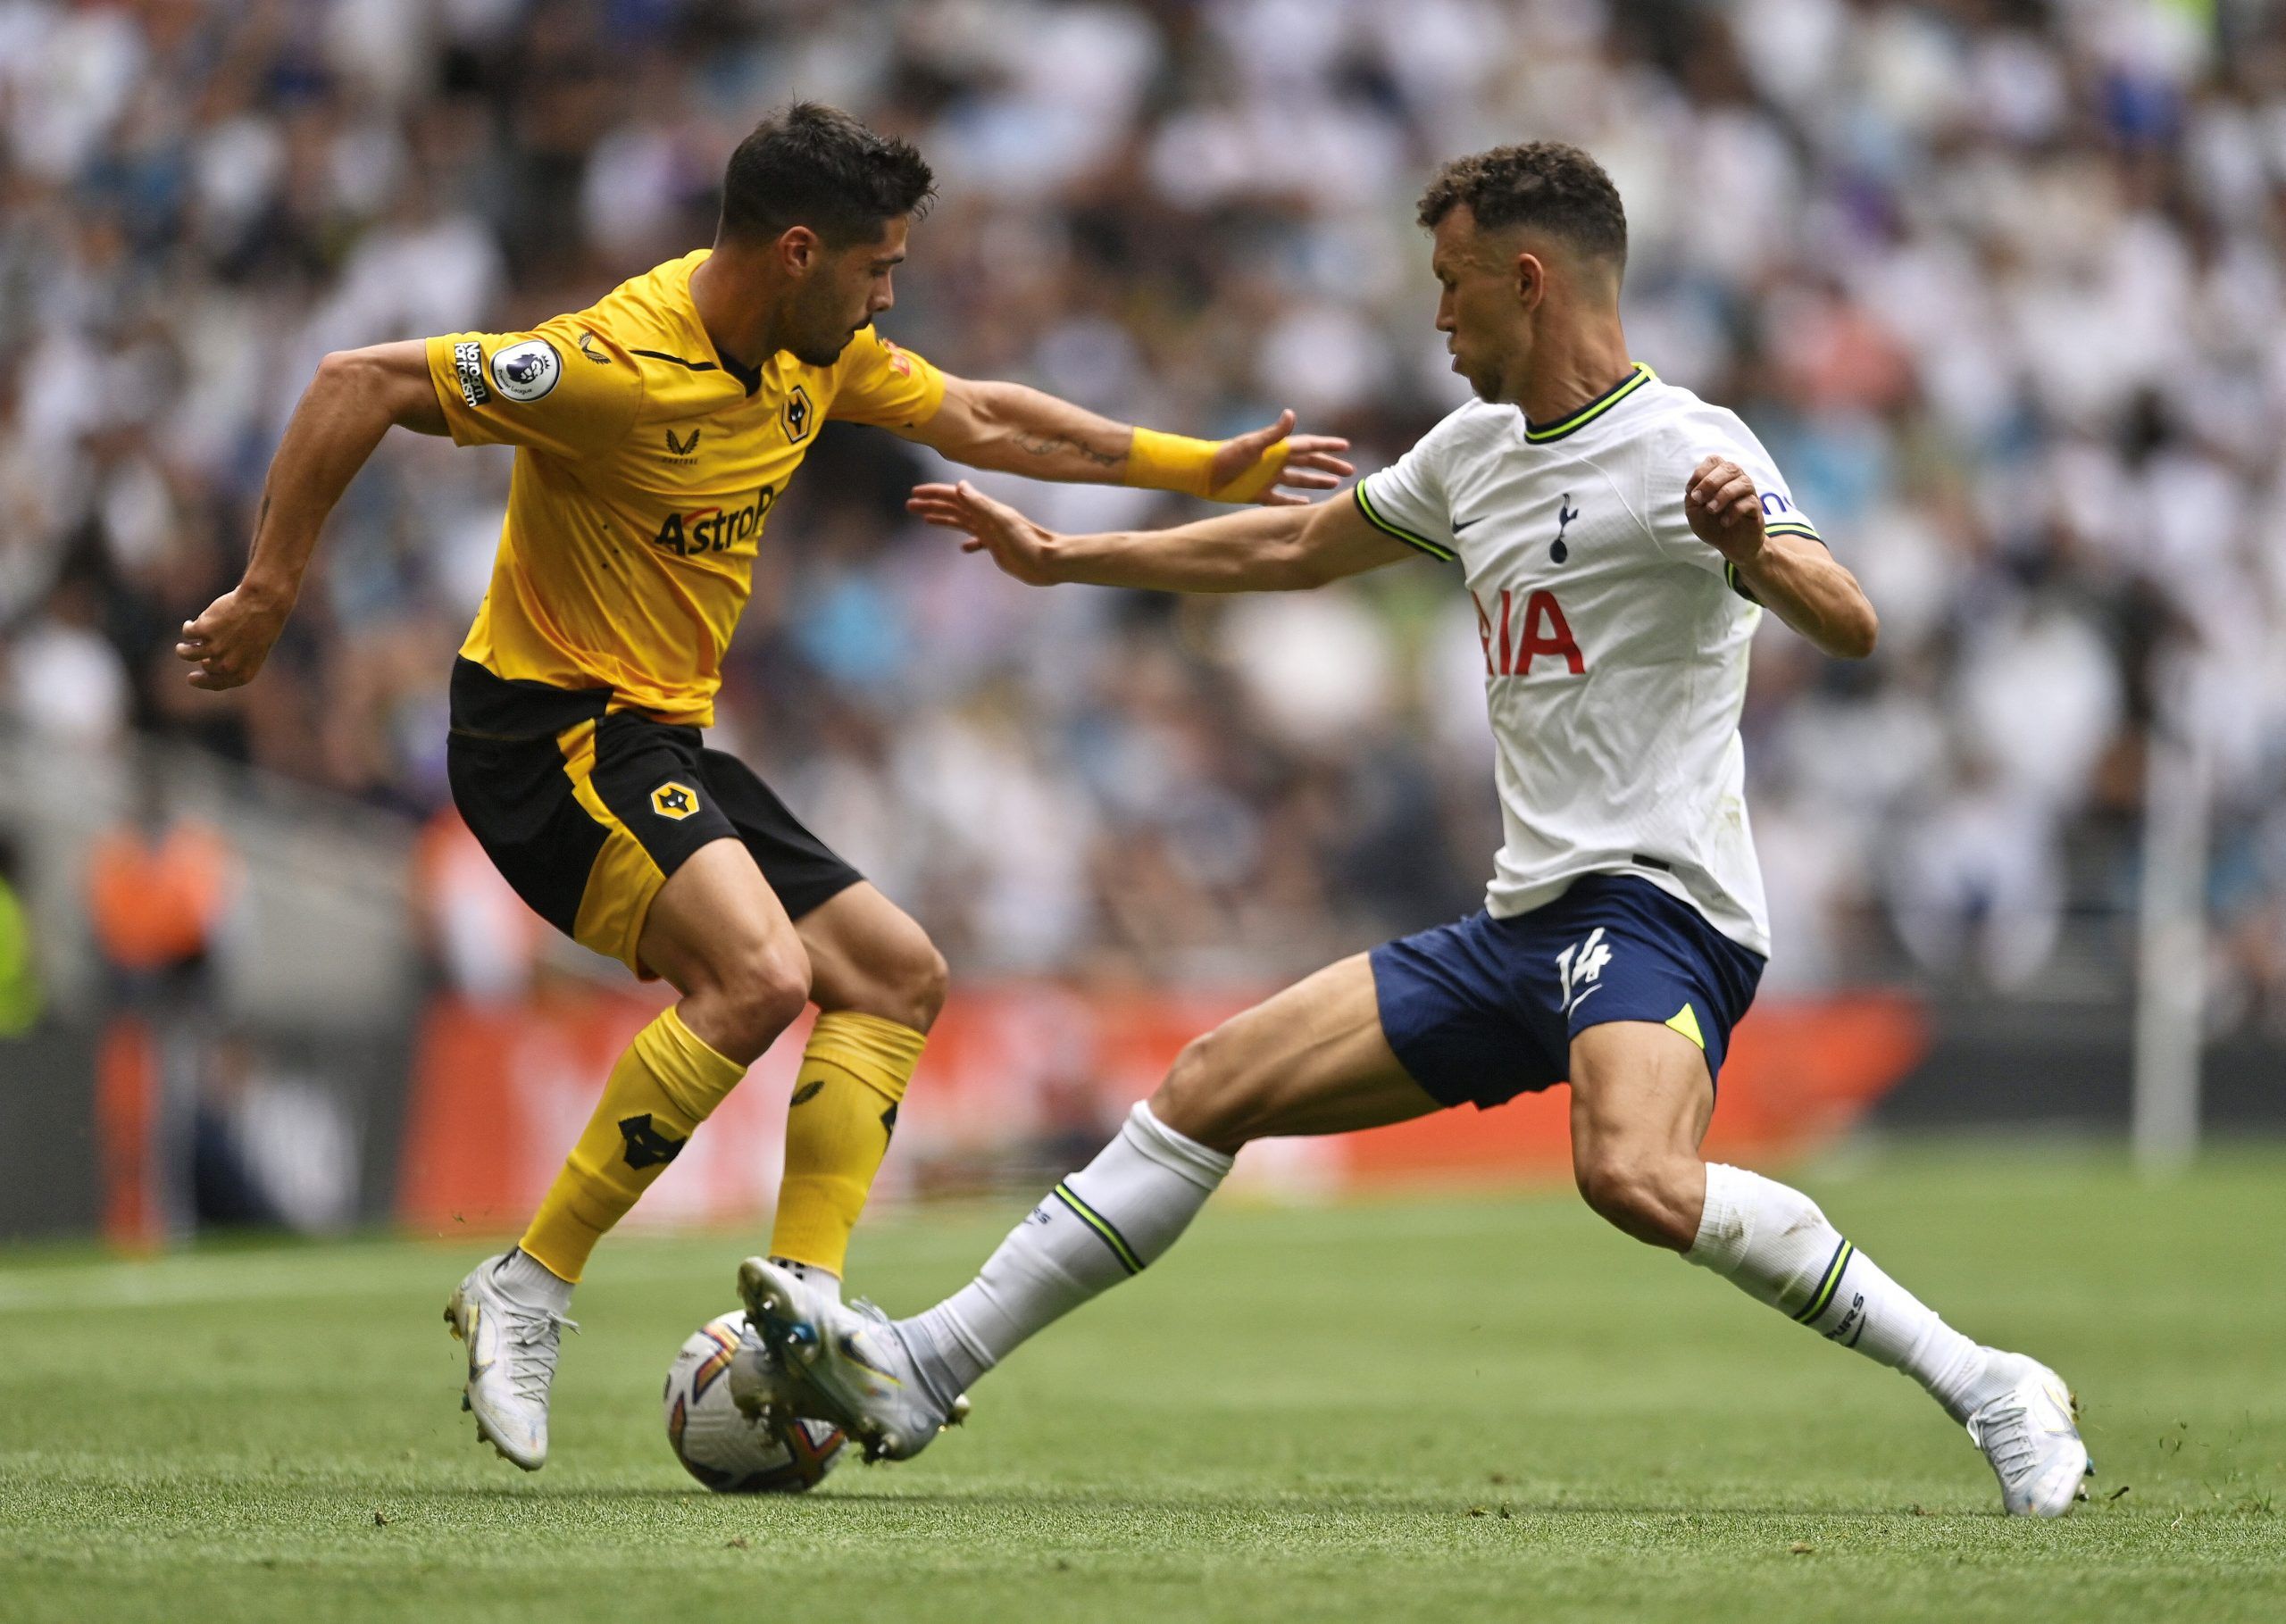 Wolves: Pedro Neto could be tempted by Arsenal move -Wolves News